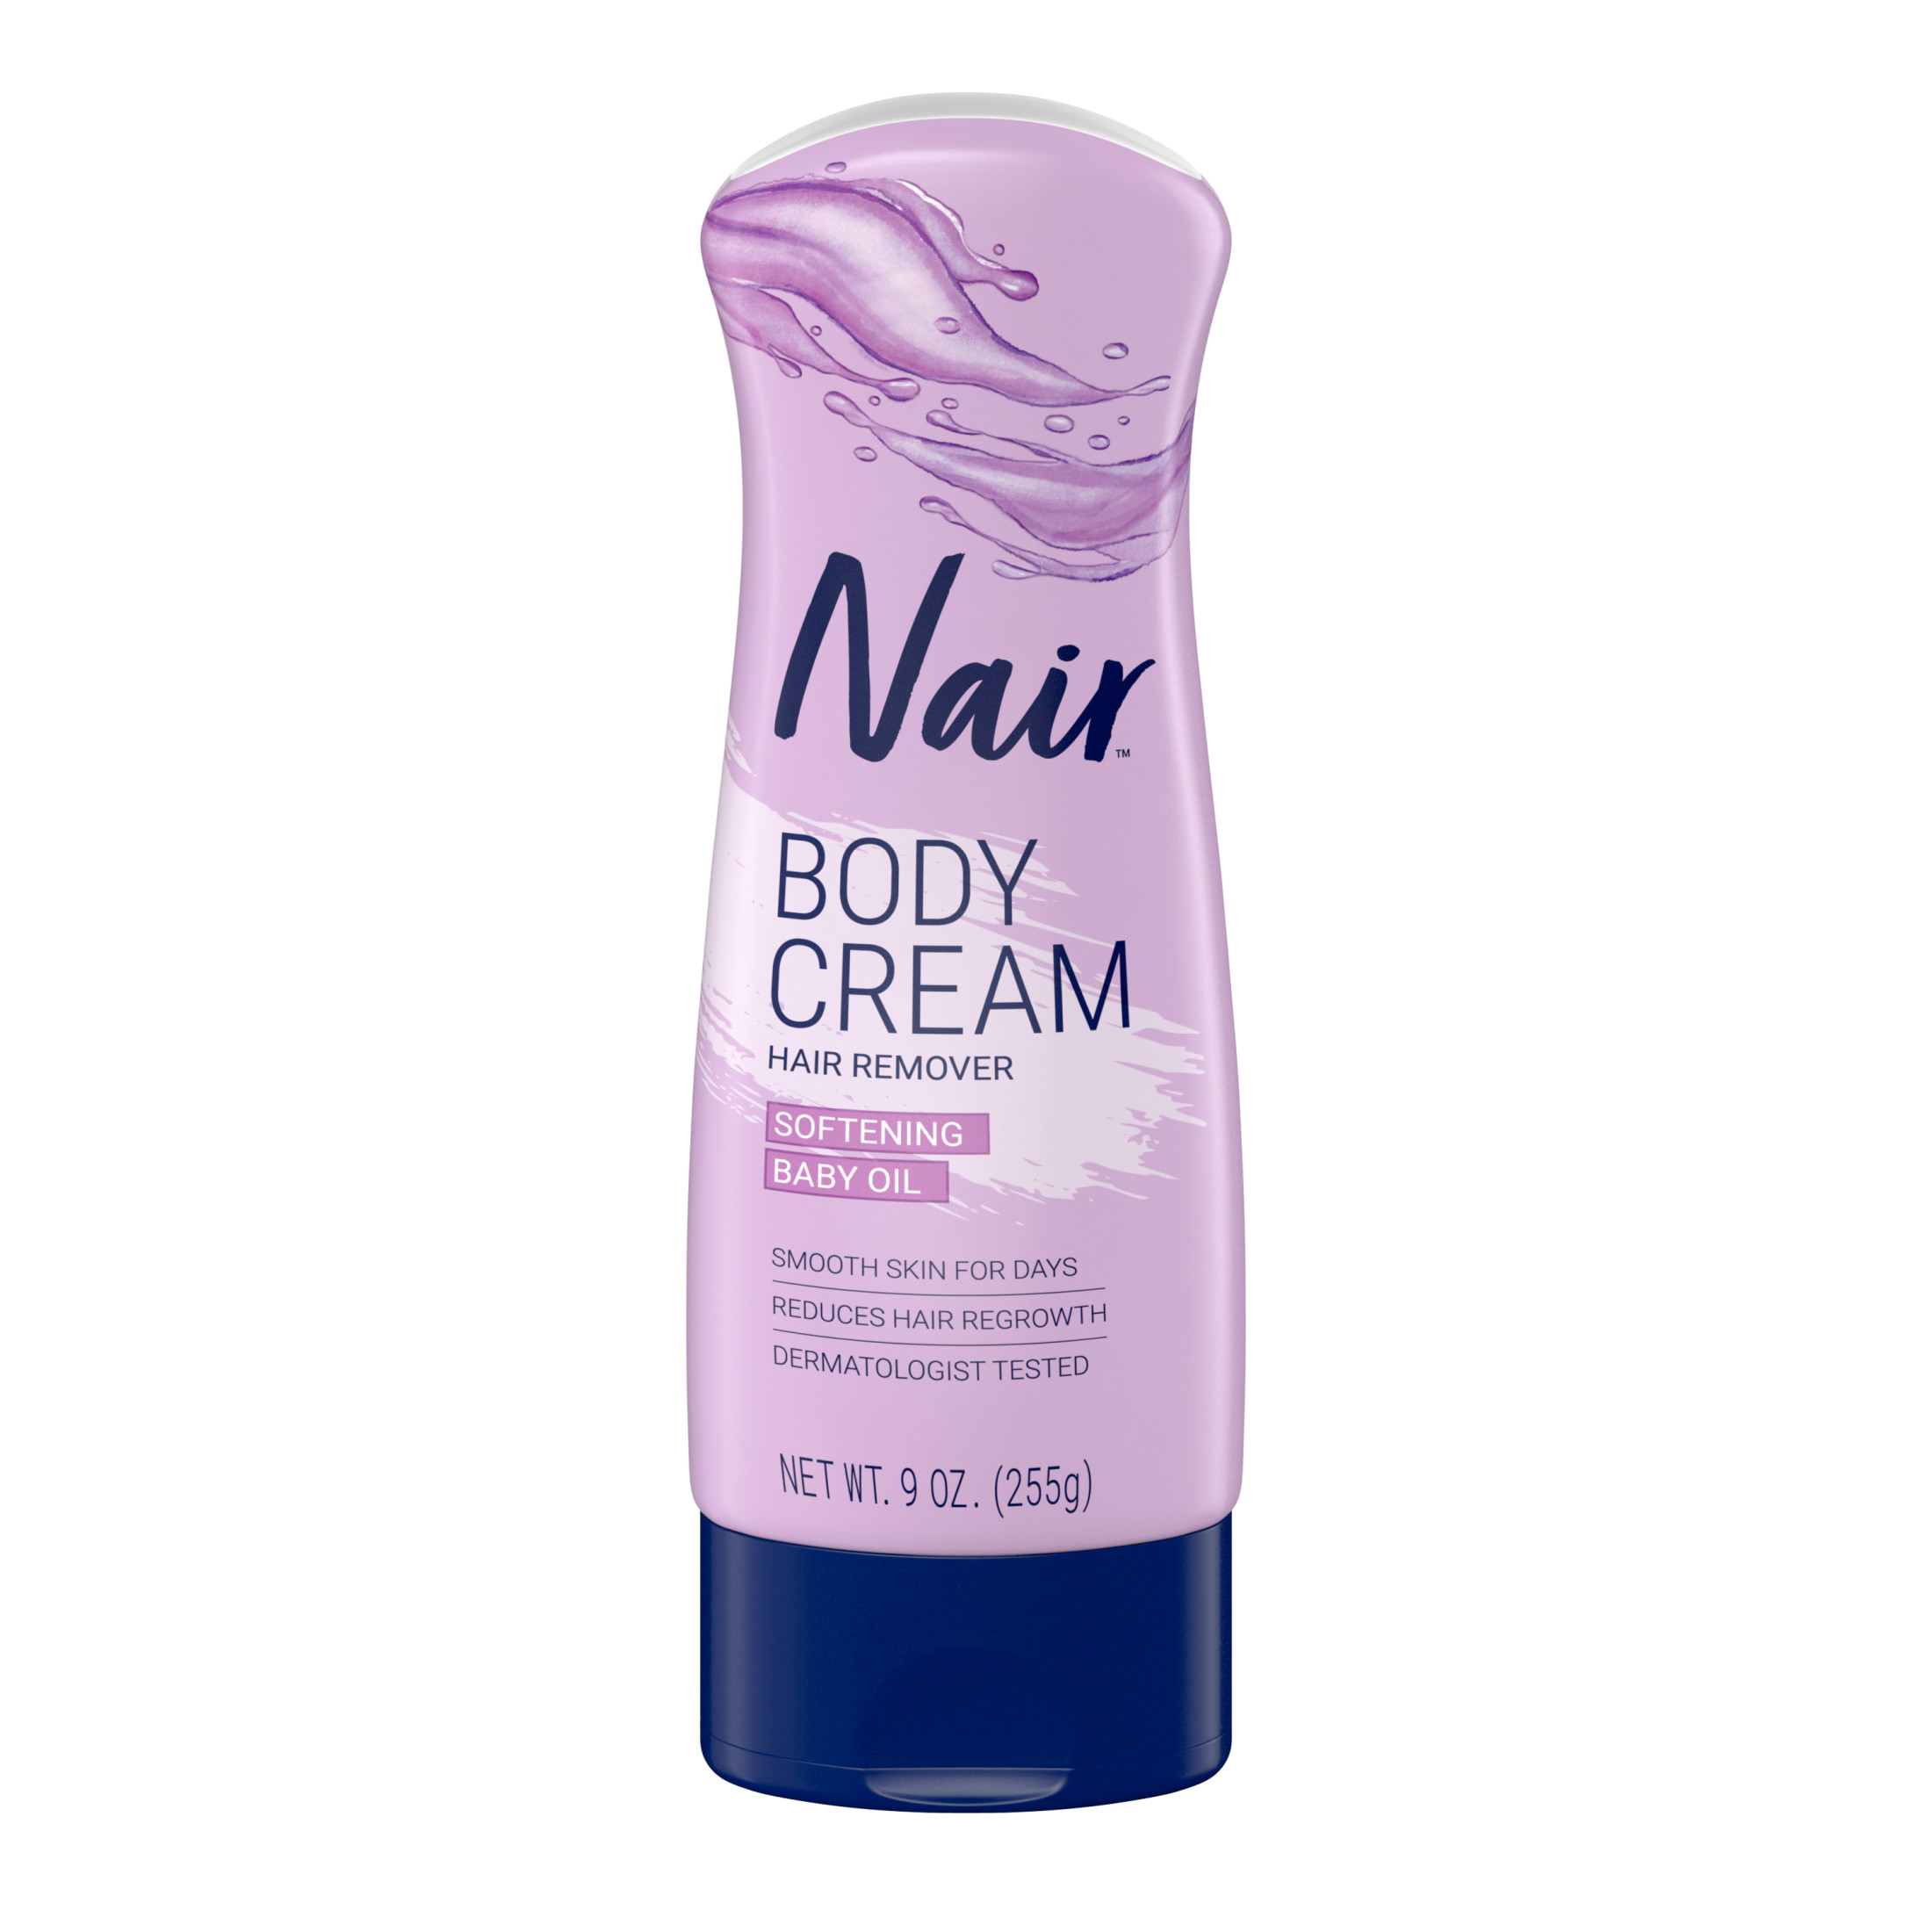 Nair Hair Removal Body Cream with Softening Baby Oil, Leg and Body Hair Remover - image 1 of 9